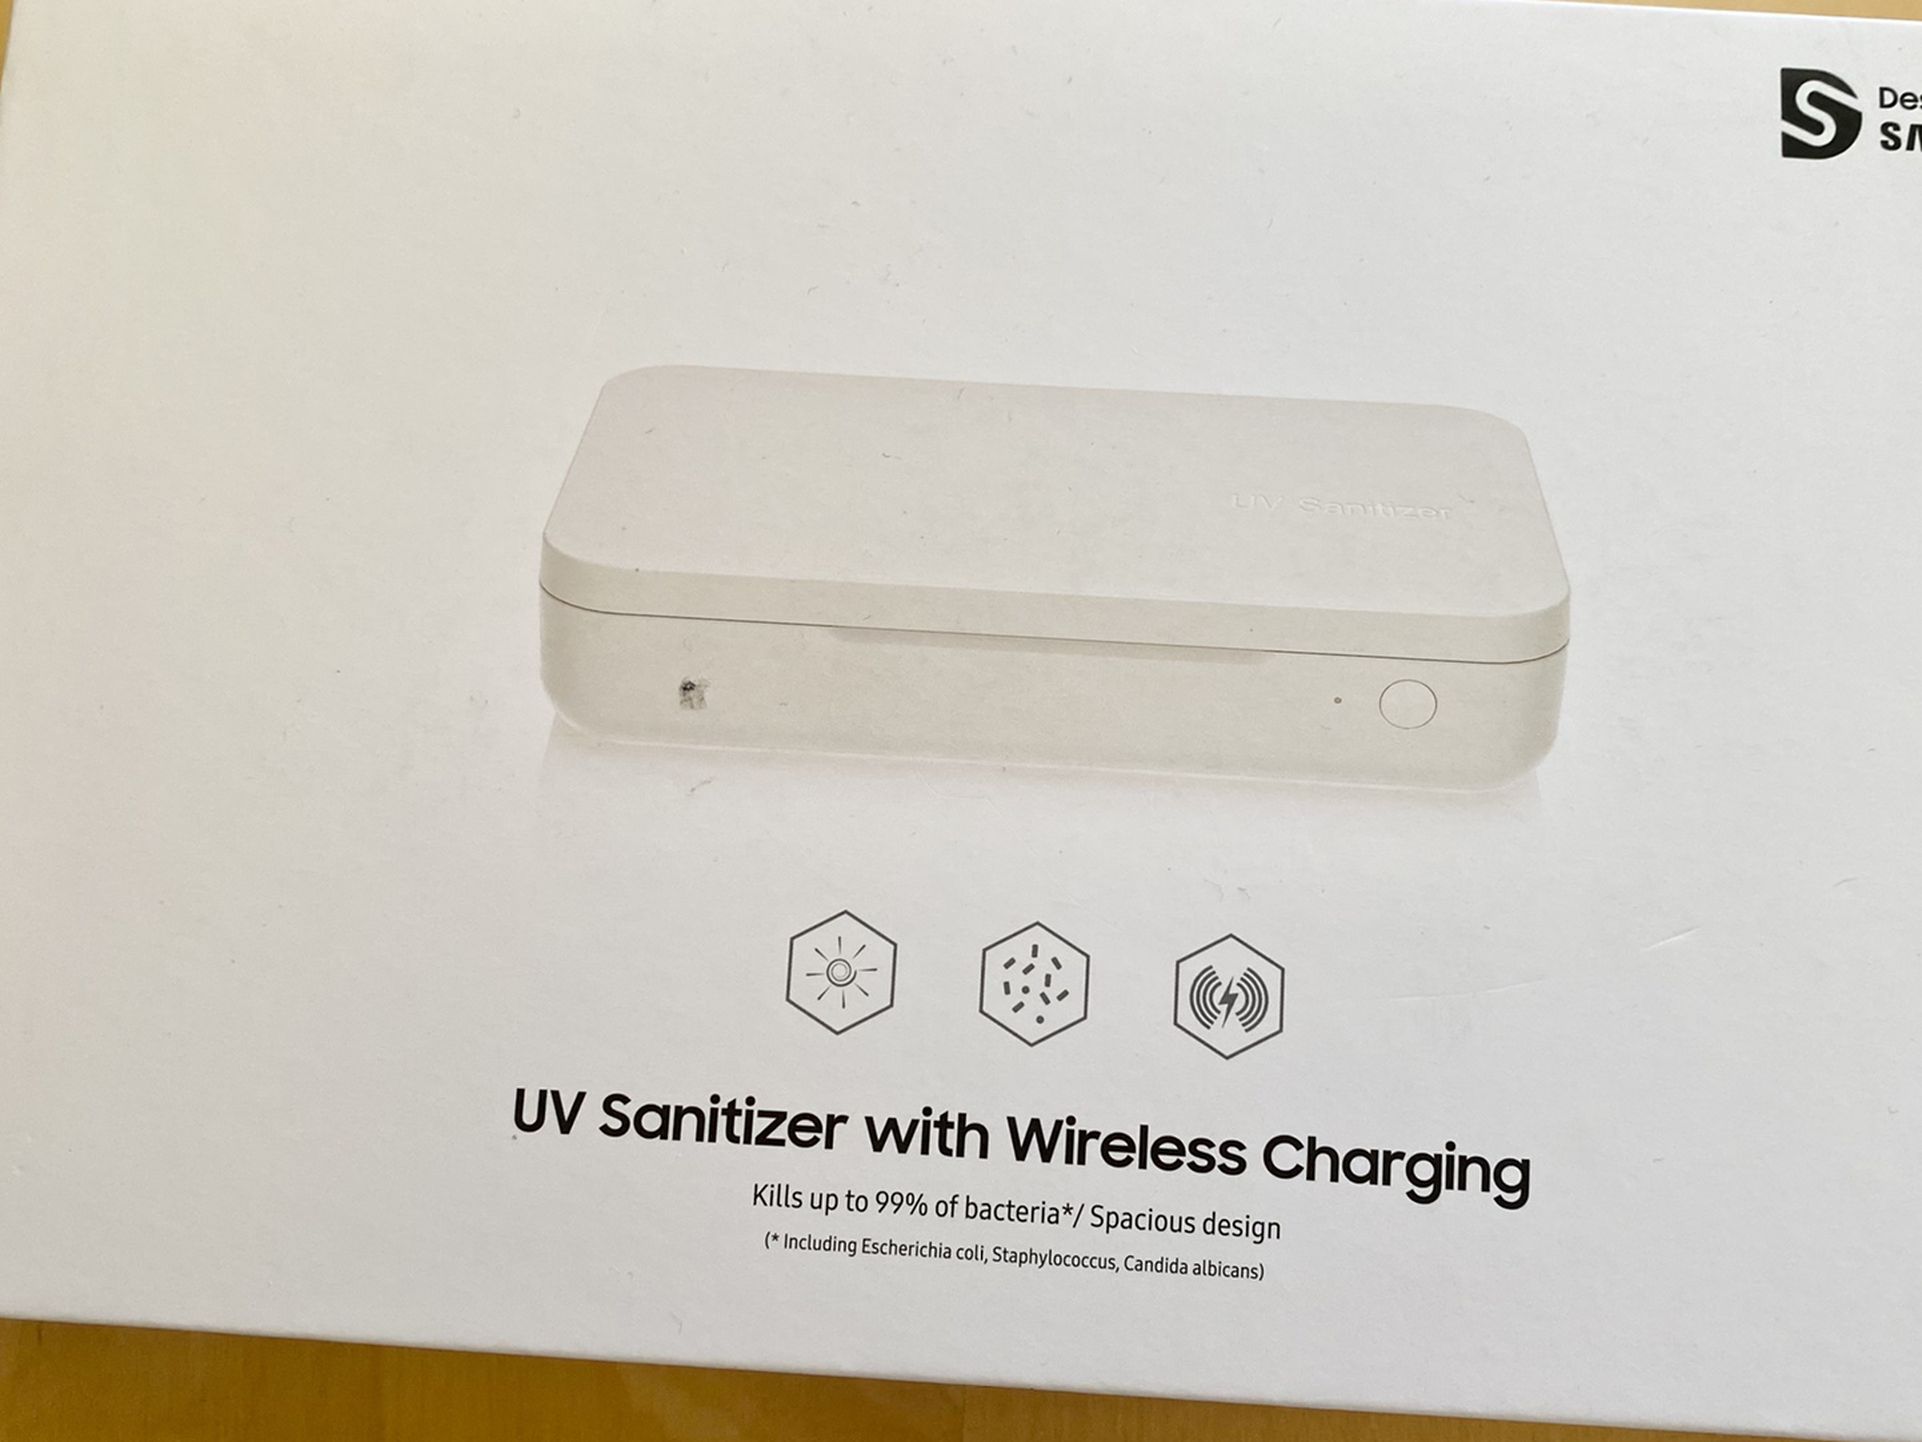 UV Sanitizer with Wireless Charging